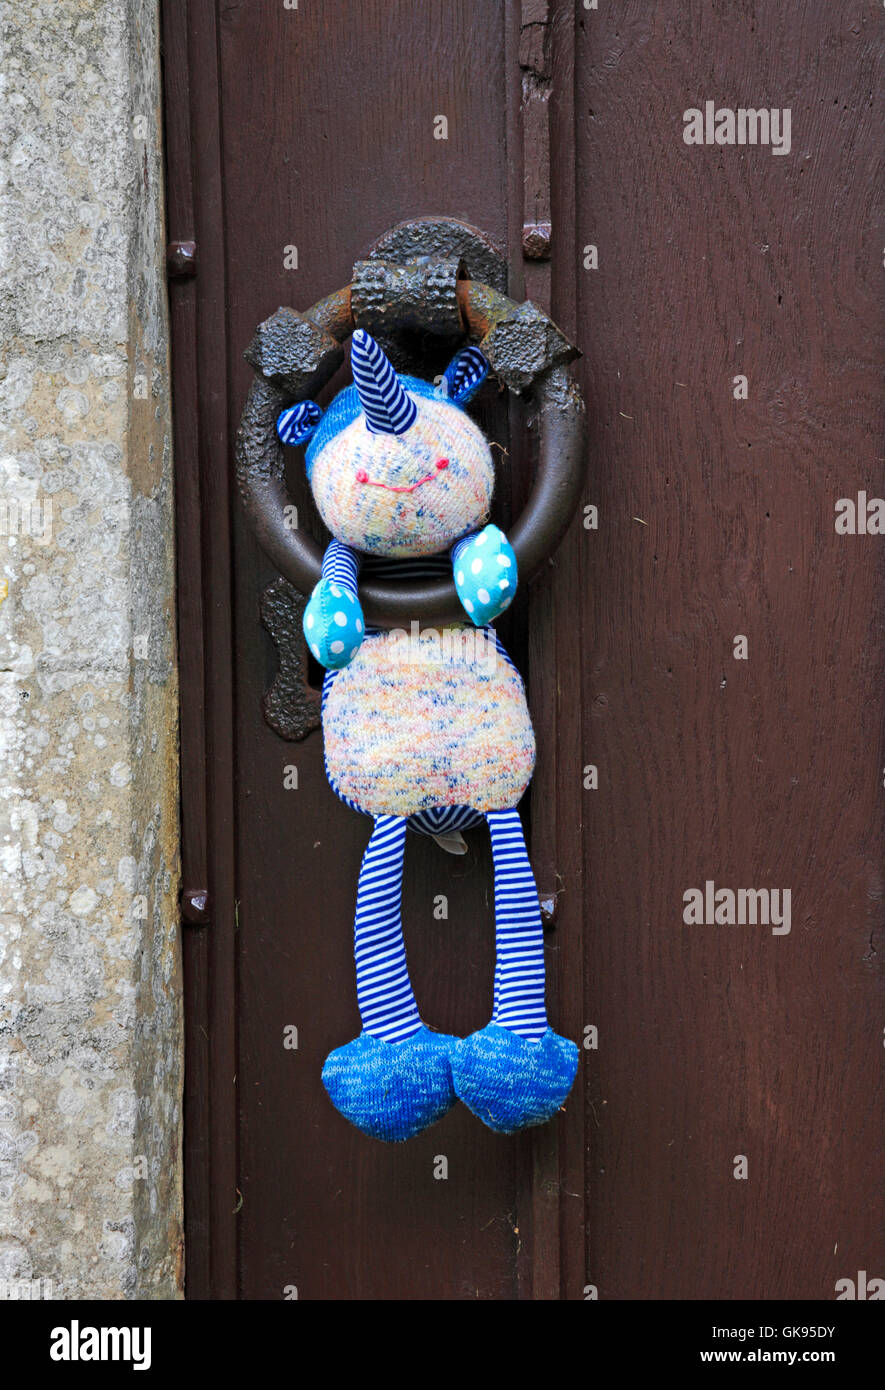 A cuddly toy placed on the church door handle at Dunston, Norfolk, England, United Kingdom. Stock Photo